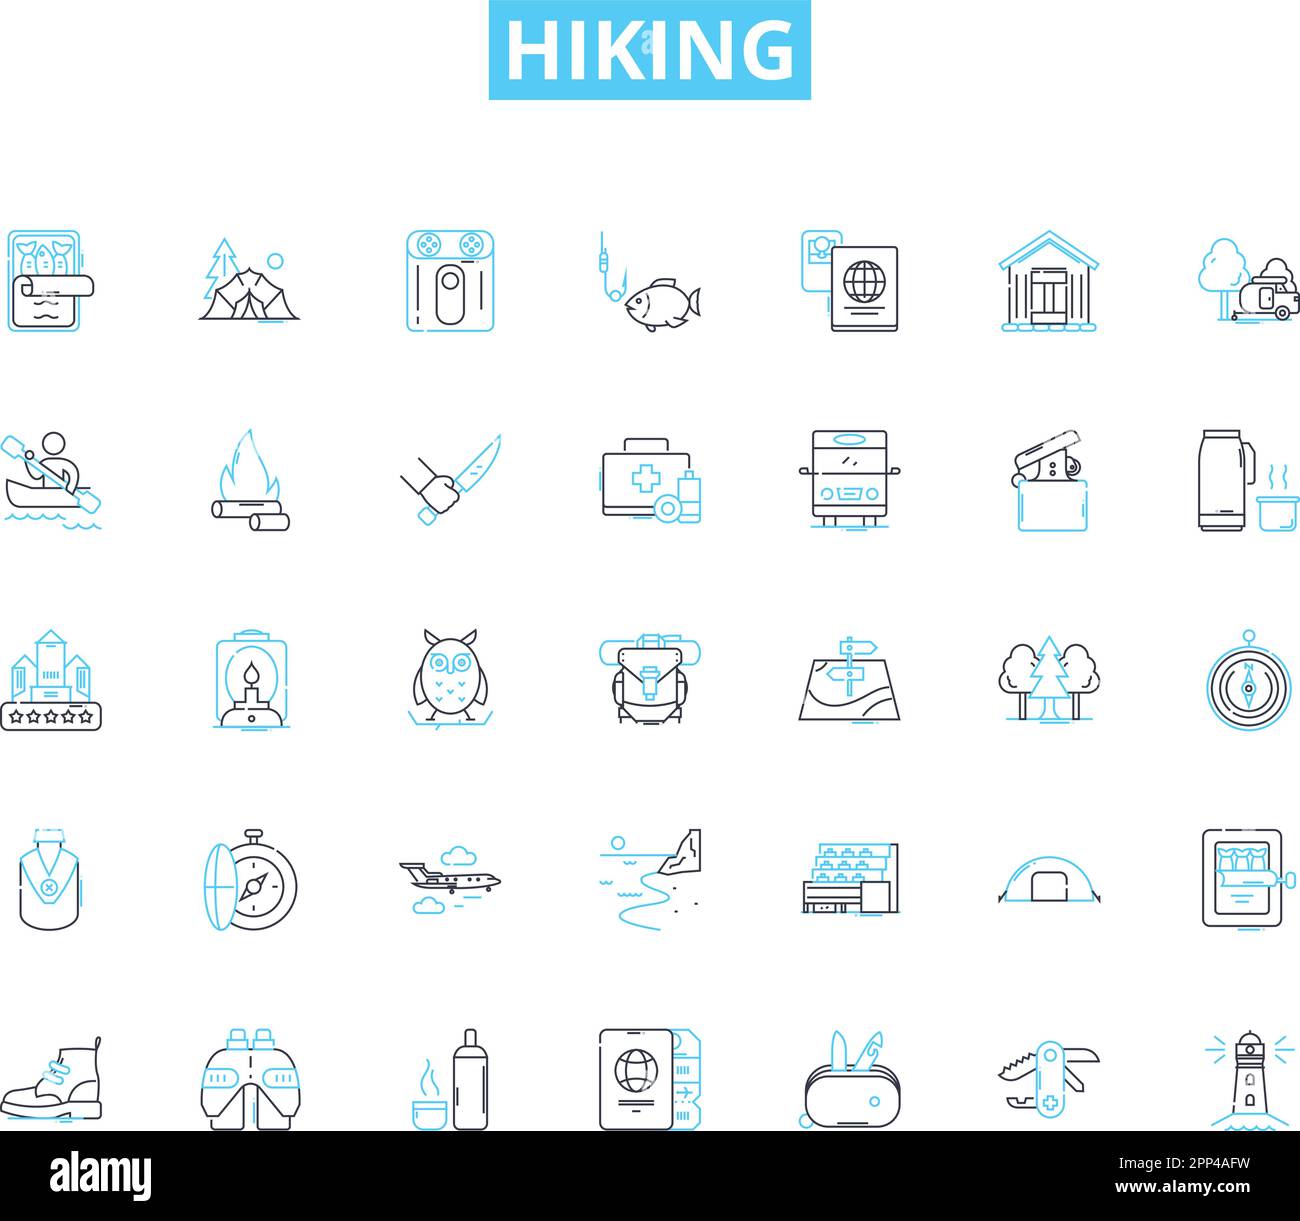 Hiking linear icons set. Trail, Summit, Scramble, Backpack, Trek, Waterfall, Breath-taking line vector and concept signs. Adventure,Explore,Wilderness Stock Vector